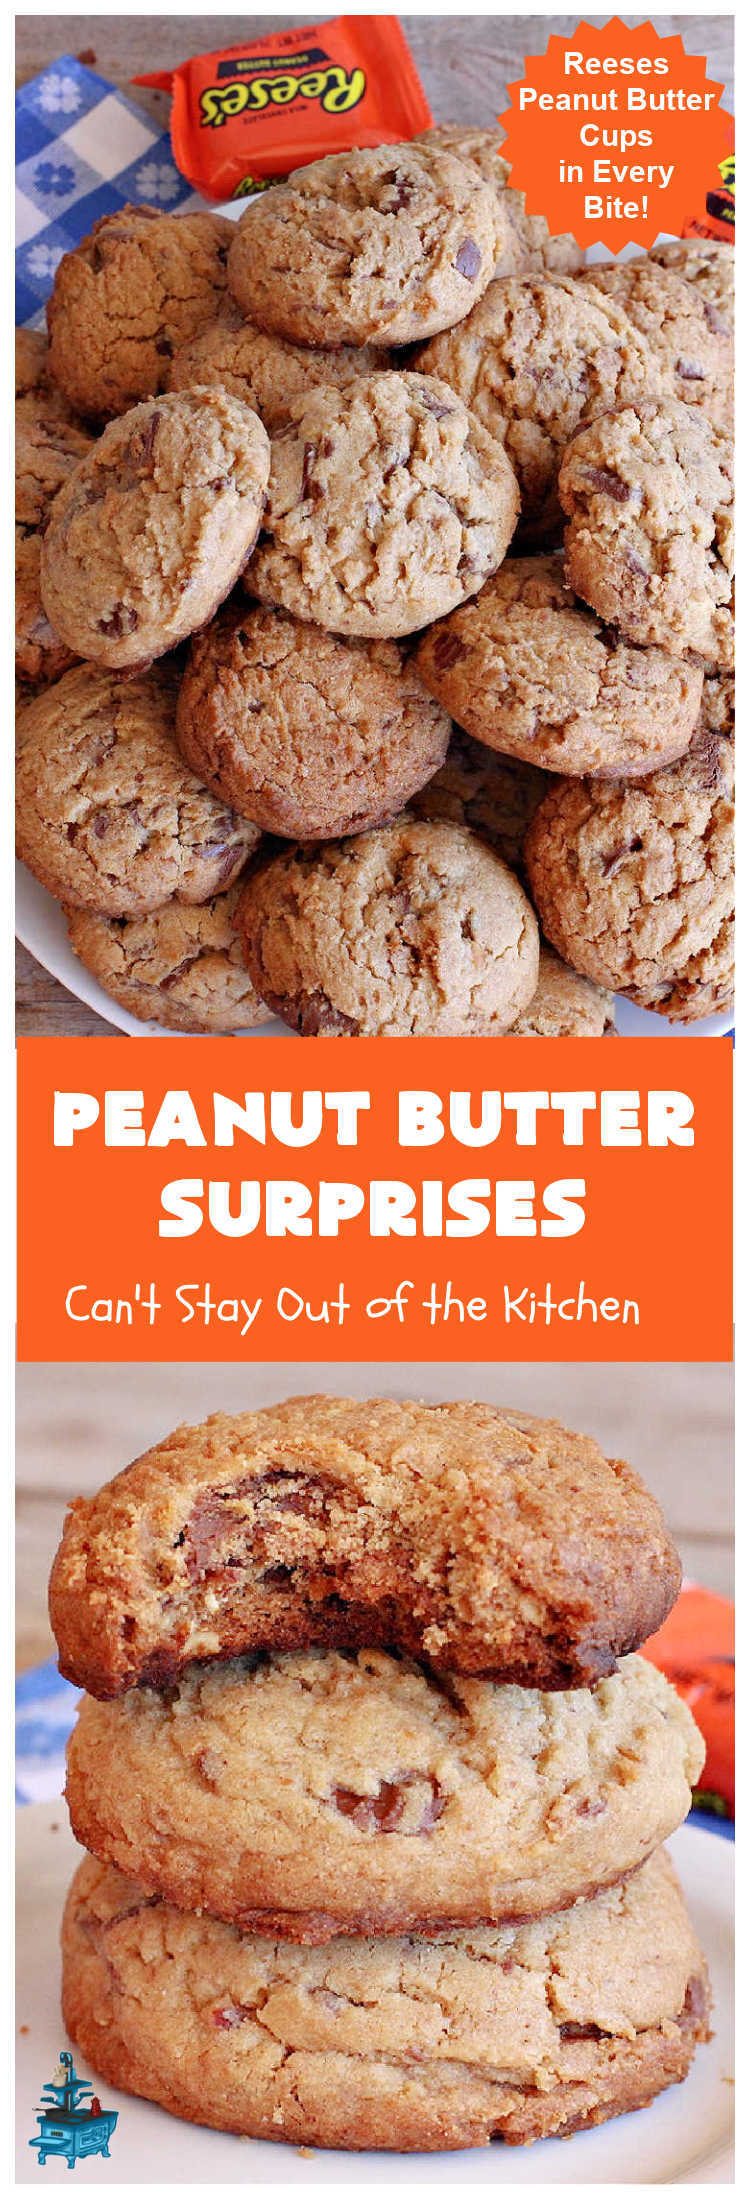 Peanut Butter Surprises | Can't Stay Out of the Kitchen | Surprise your family with these amazing #cookies. They're chocked full of #PeanutButter & #ReesesPeanutButterCups. Every bite will rock your world! Great for #tailgating or #holiday parties. #chocolate #dessert #ChocolateDessert #PeanutButterDessert #HolidayDessert #ReesesPeanutButterCupsDessert #PeanutButterSurprises